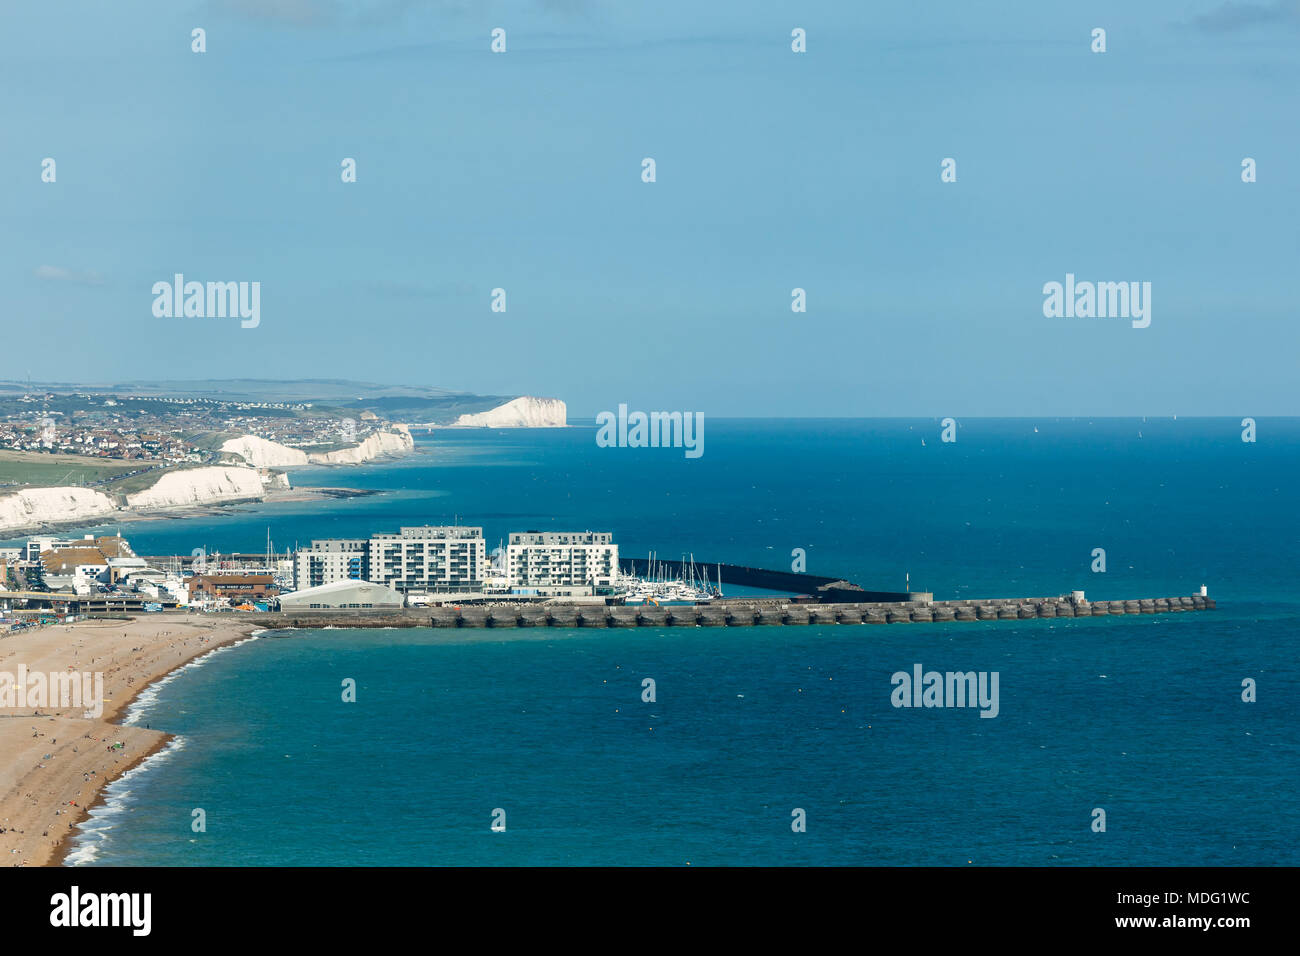 Brighton, United Kingdom - AUGUST 1, 2017: tourists admire the amazing view of English channel and the city, the British Airways i360 observation towe Stock Photo